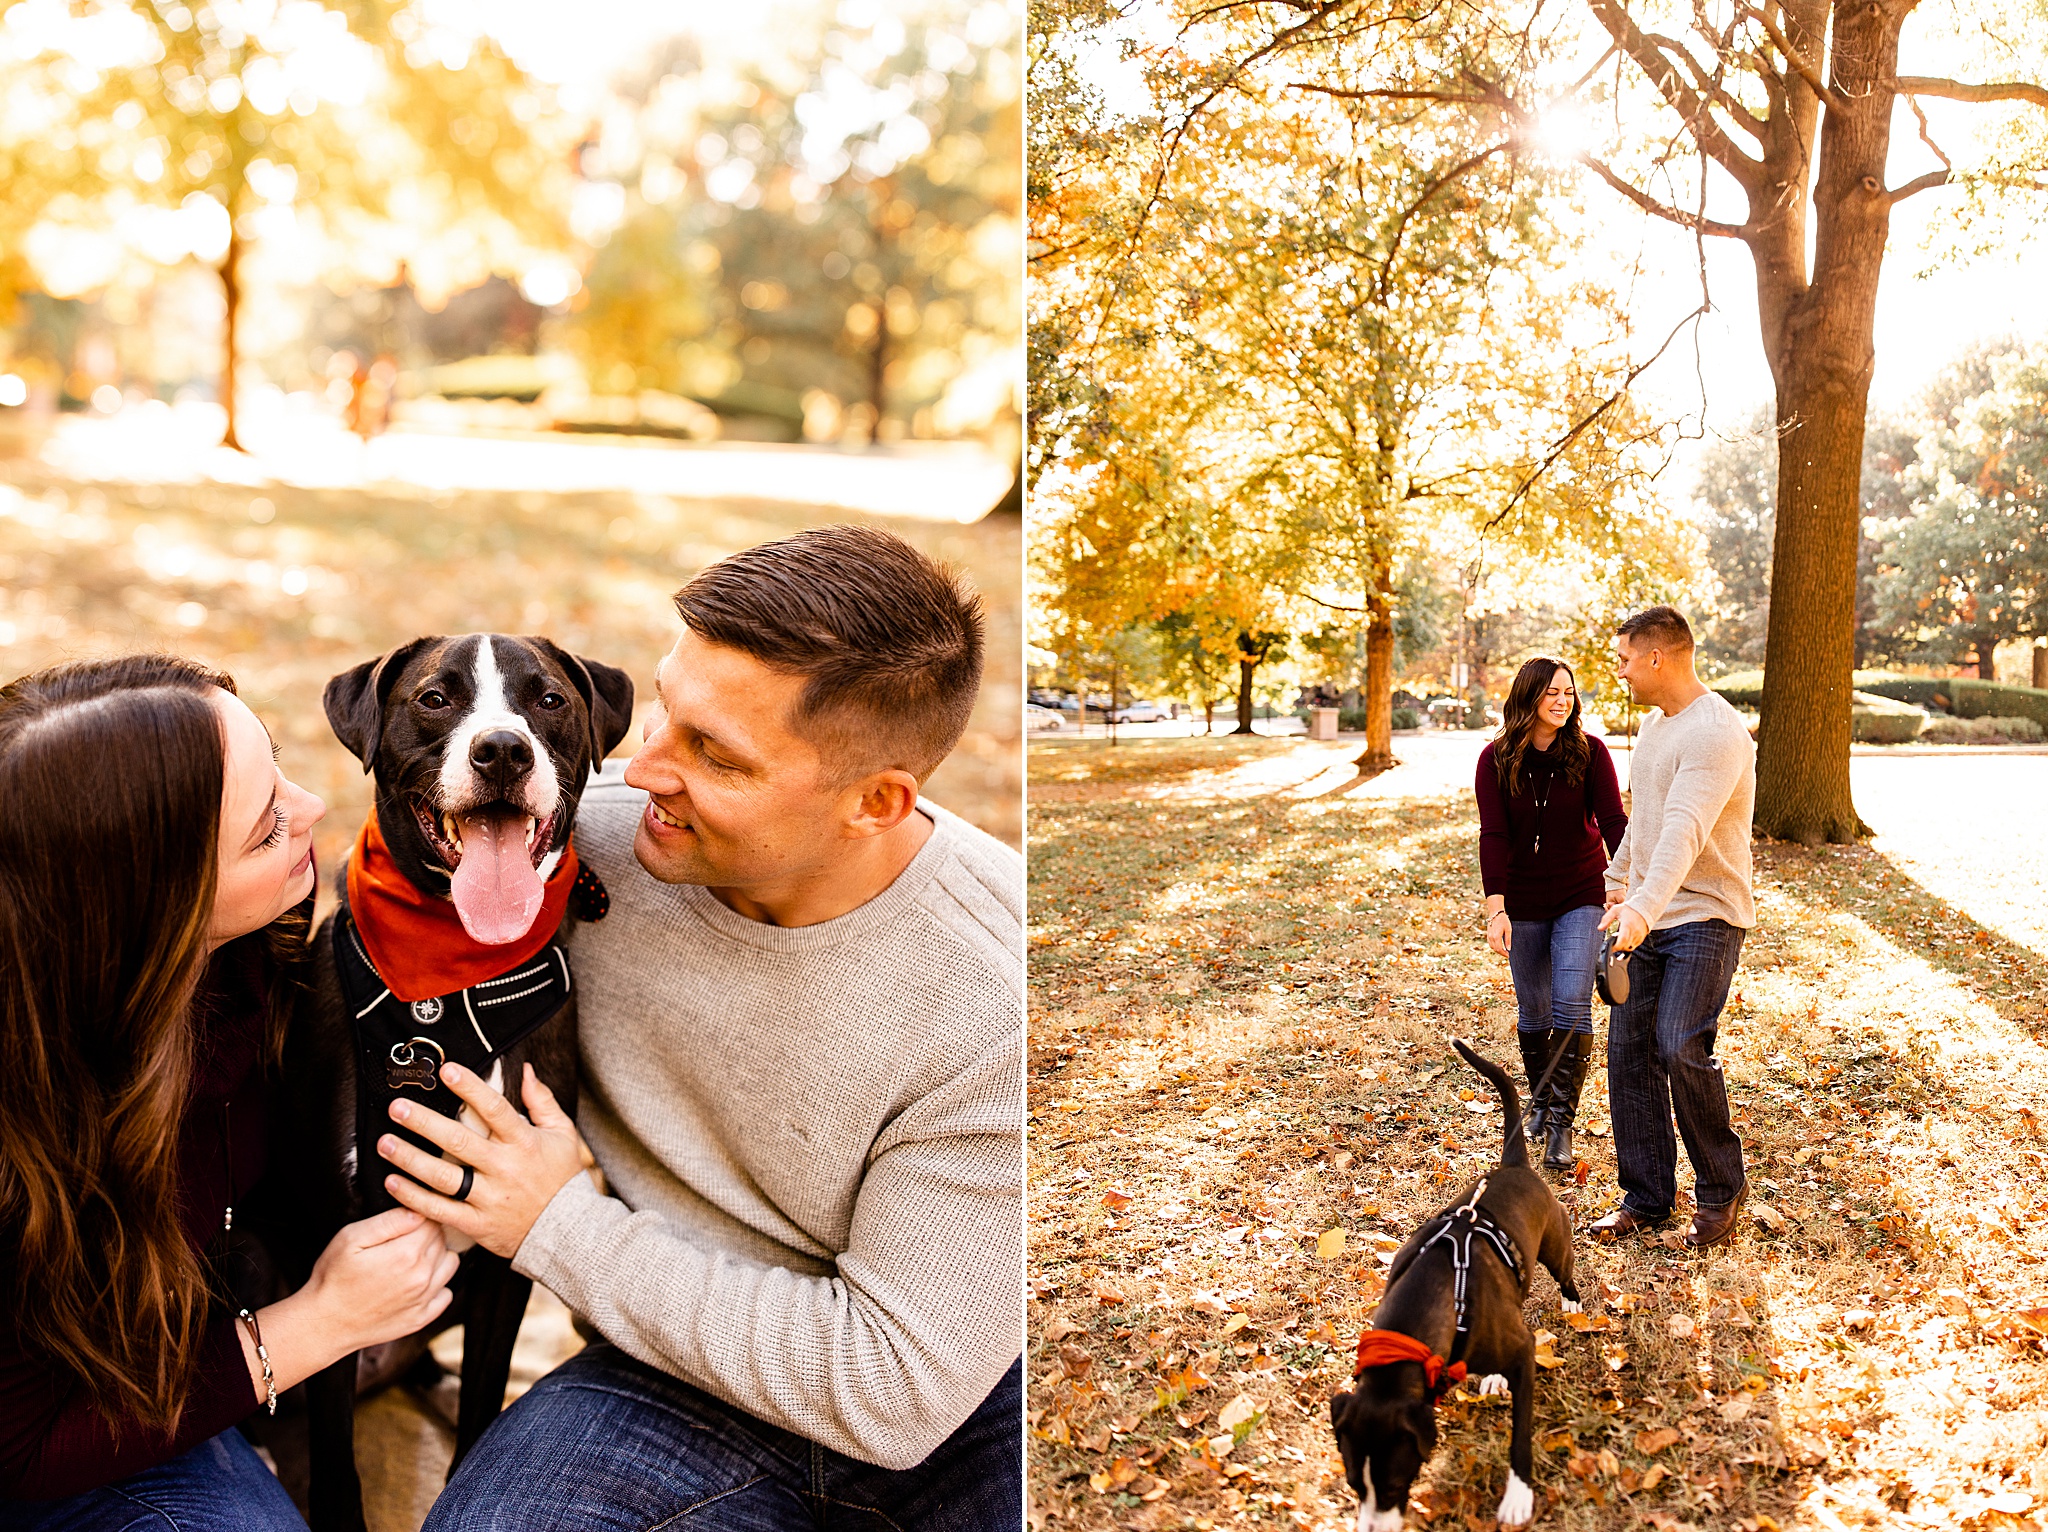 Tips to include your dog in your engagement photos